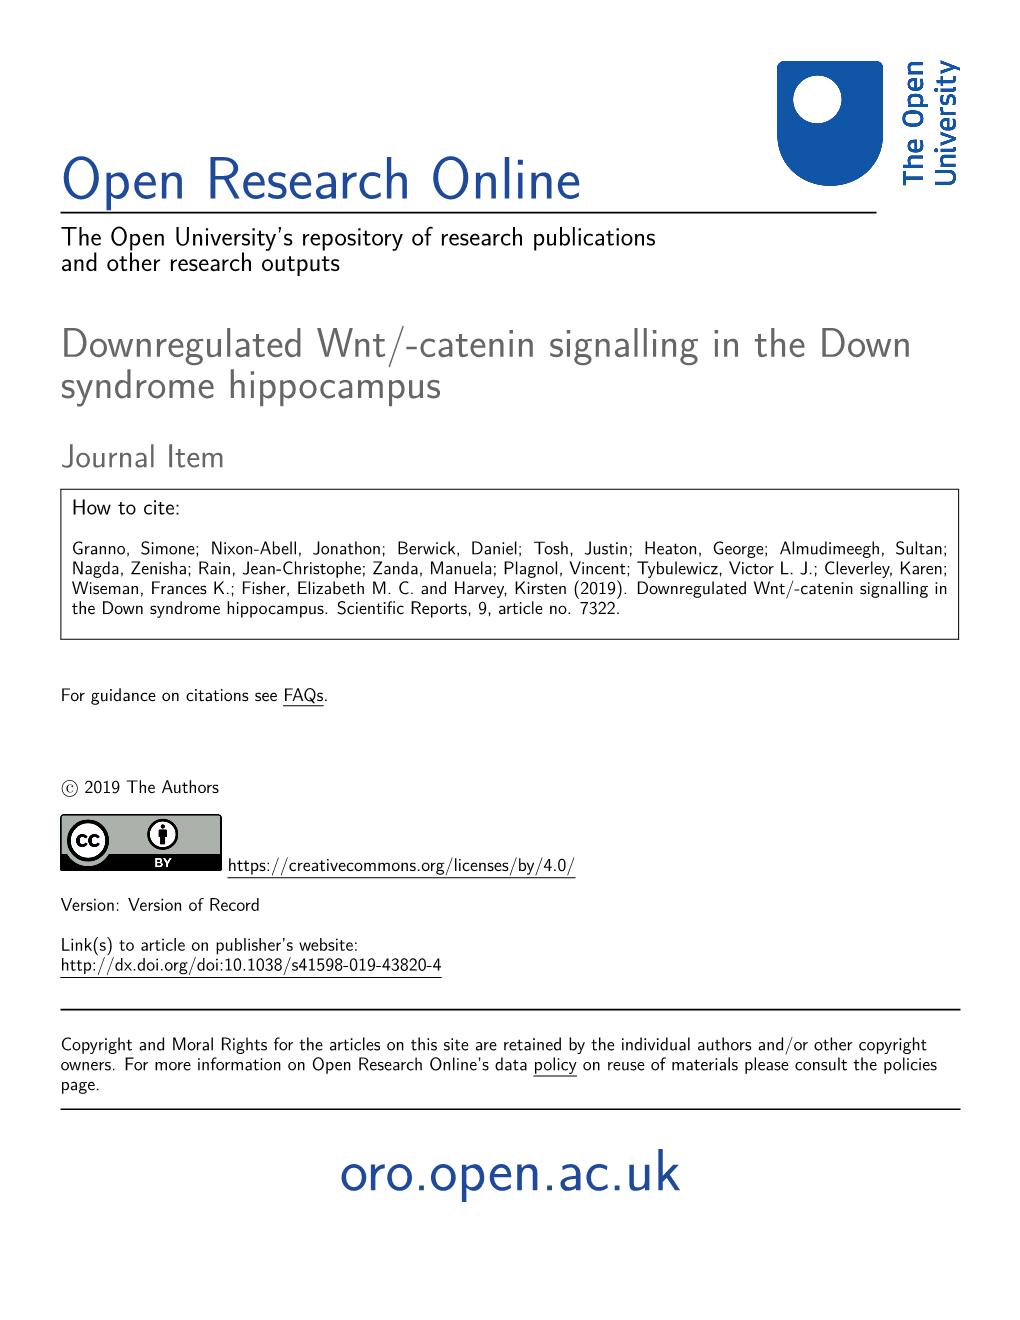 Downregulated Wnt/-Catenin Signalling in the Down Syndrome Hippocampus